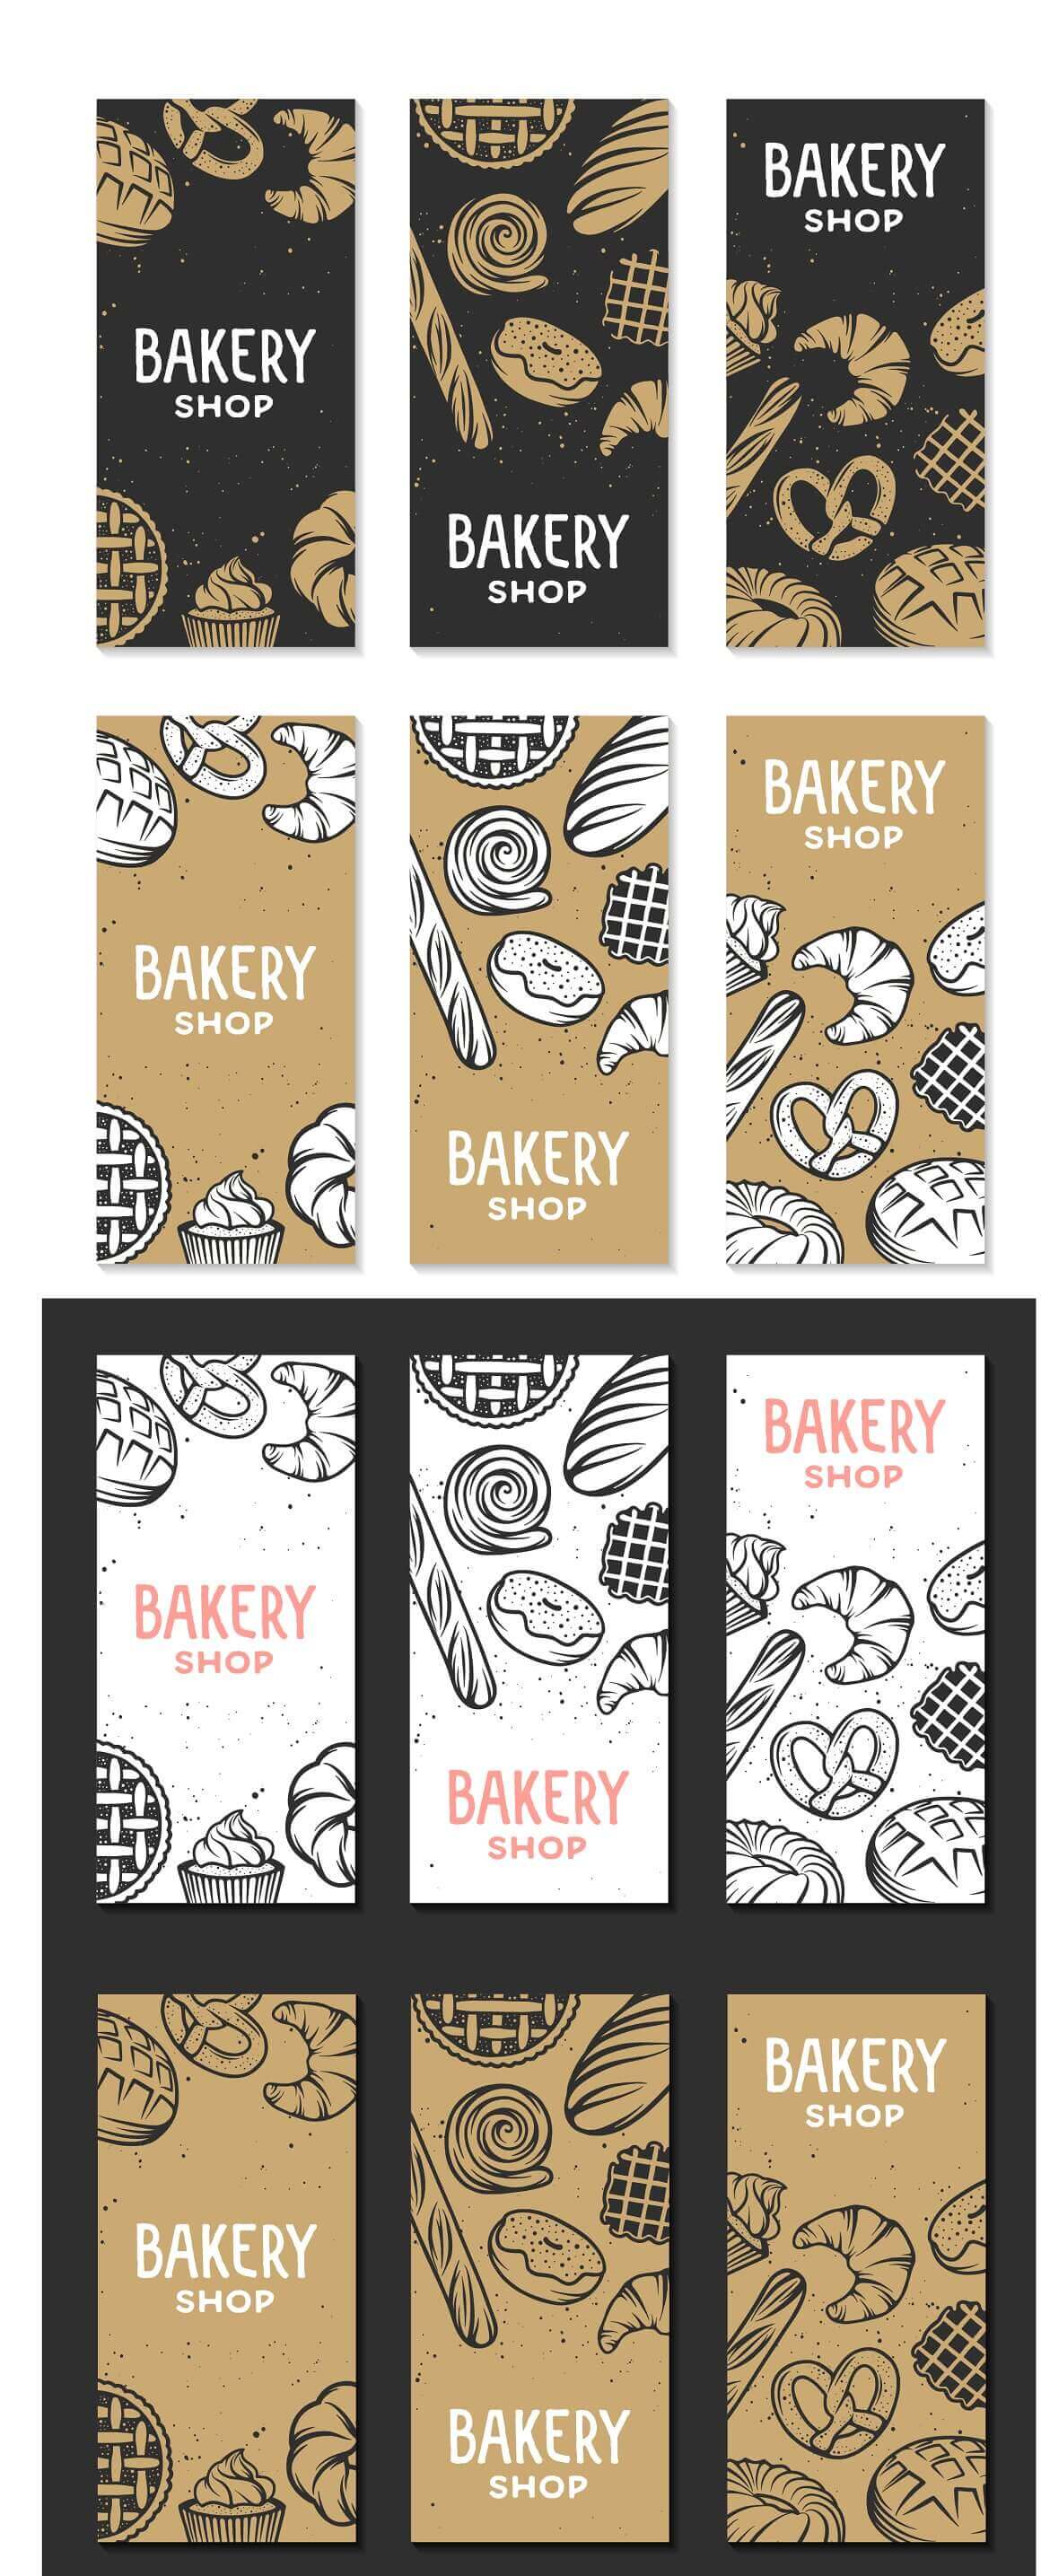 Six cards with a bakery logo on a white background and six on a gray background.